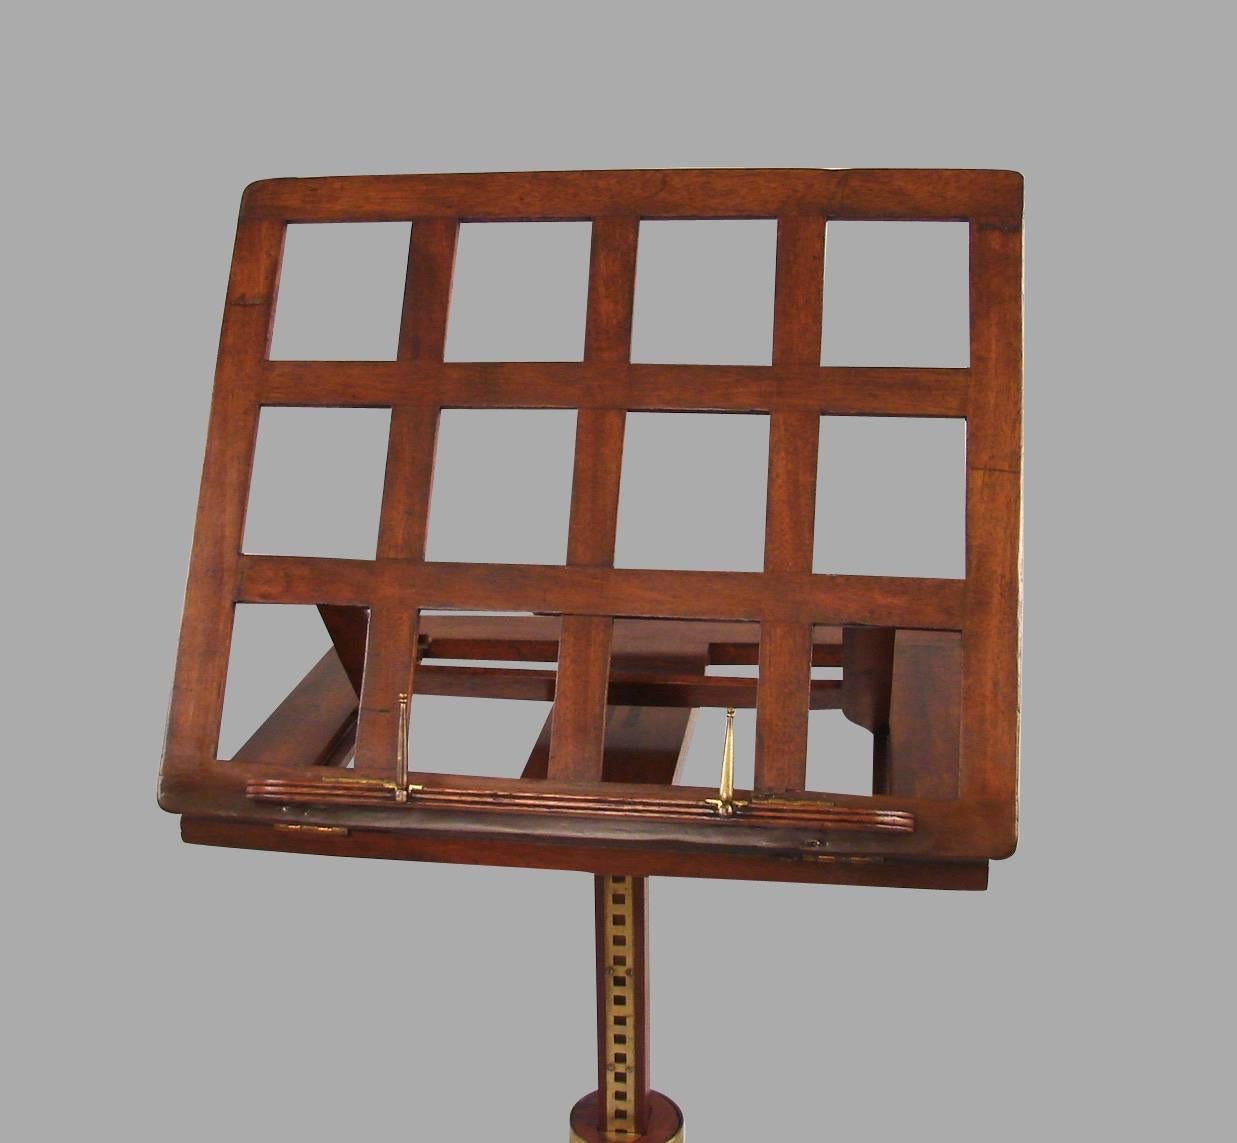 A Regency mahogany music stand, the top with a ratcheted mechanism supported on an adjustable square column with an embossed brass band, terminating in a turned column supported by a molded tripod base ending in brass box casters, circa 1800-1820.